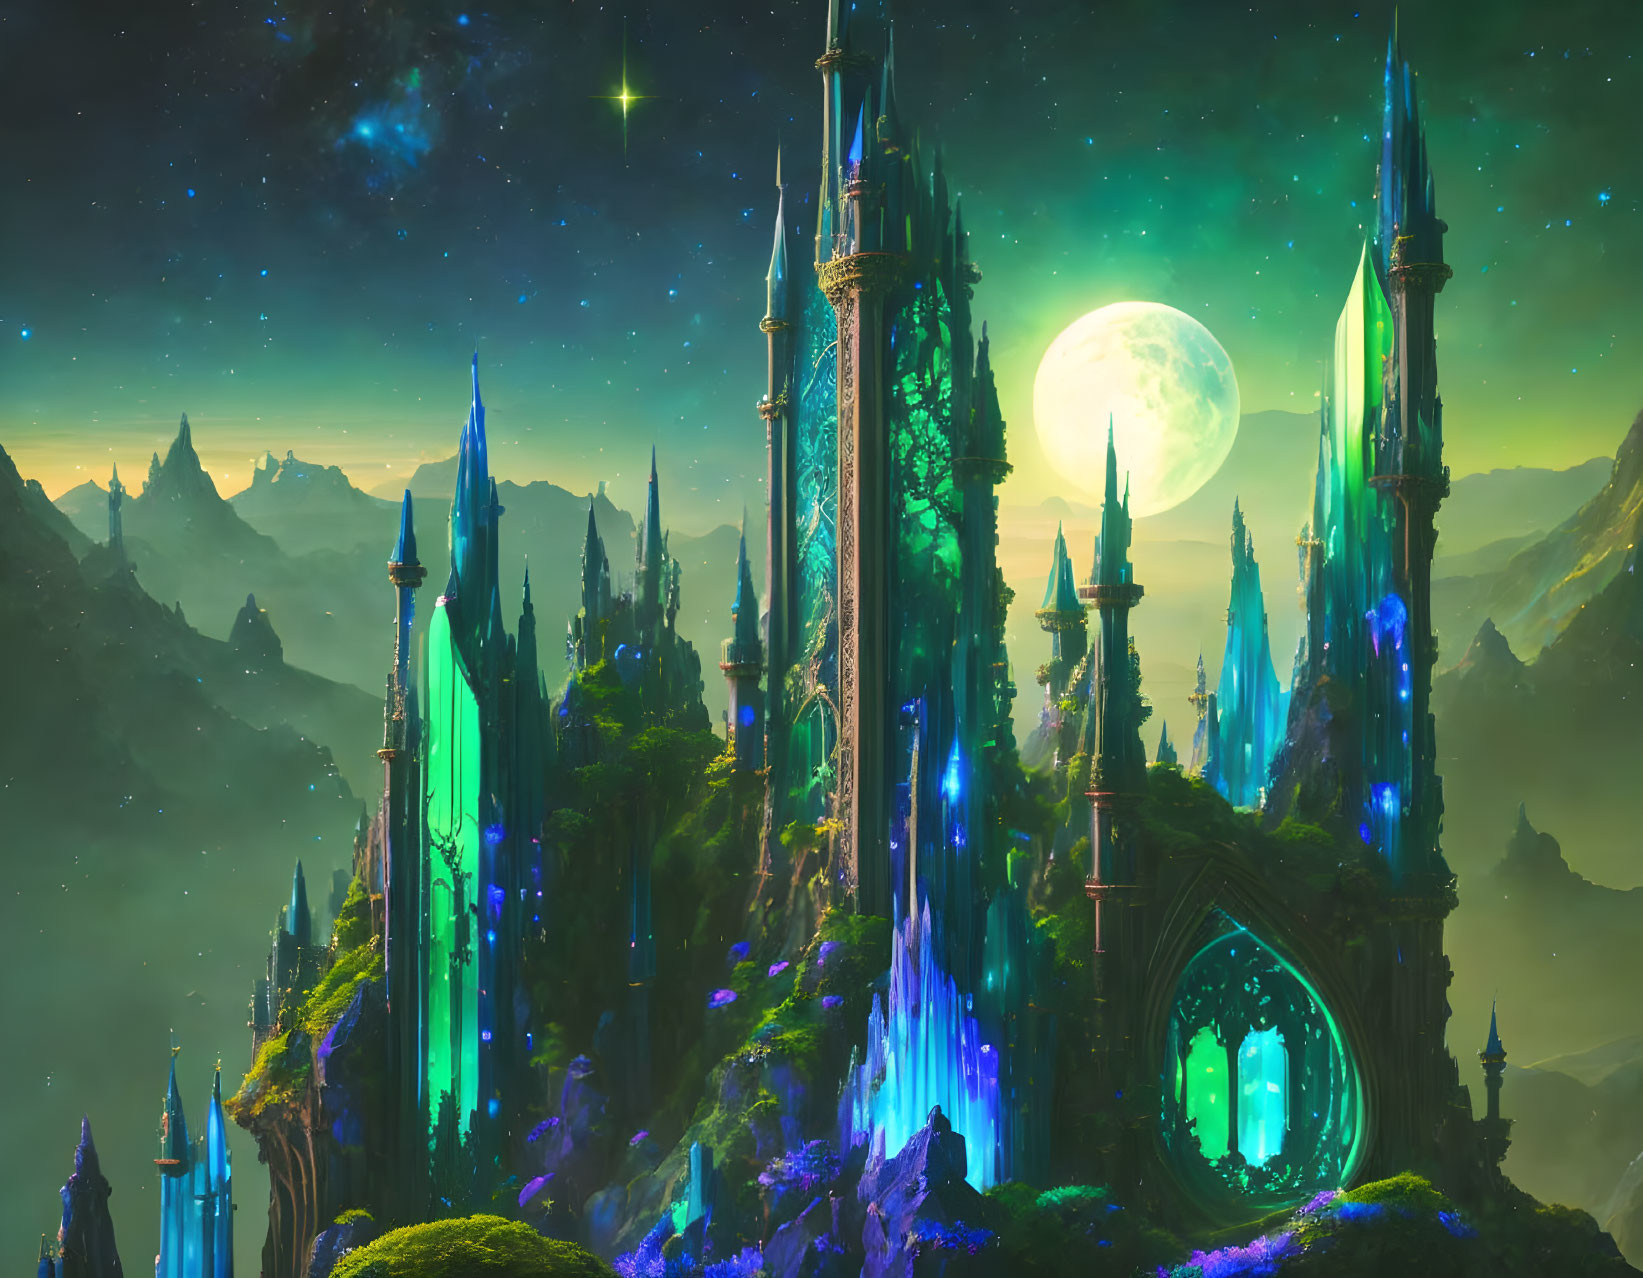 Fantasy landscape with glowing towers and starlit sky